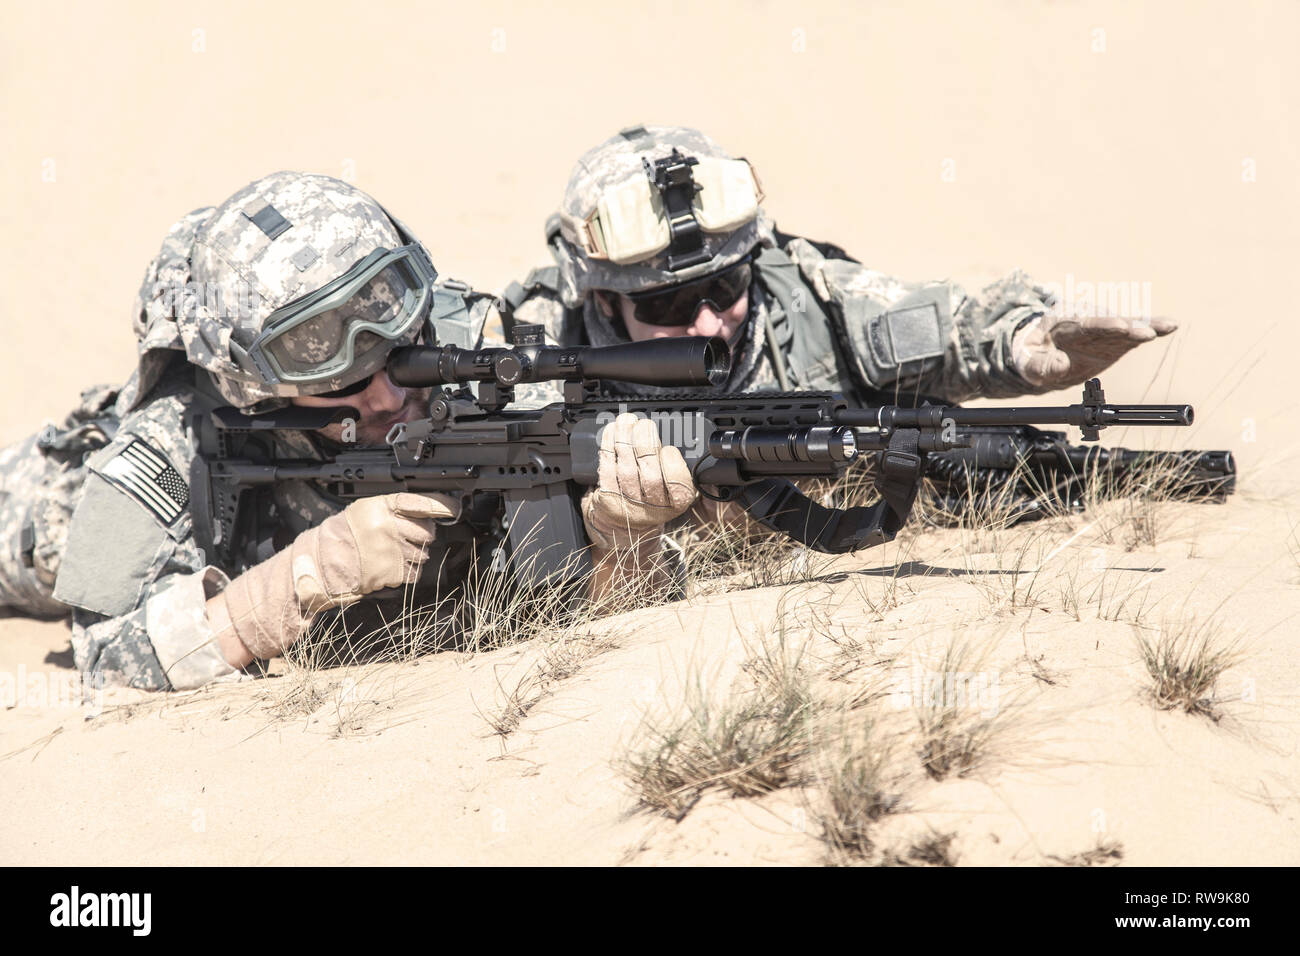 U.S. airborne infantry spotter and marksman in action in the desert. Stock Photo